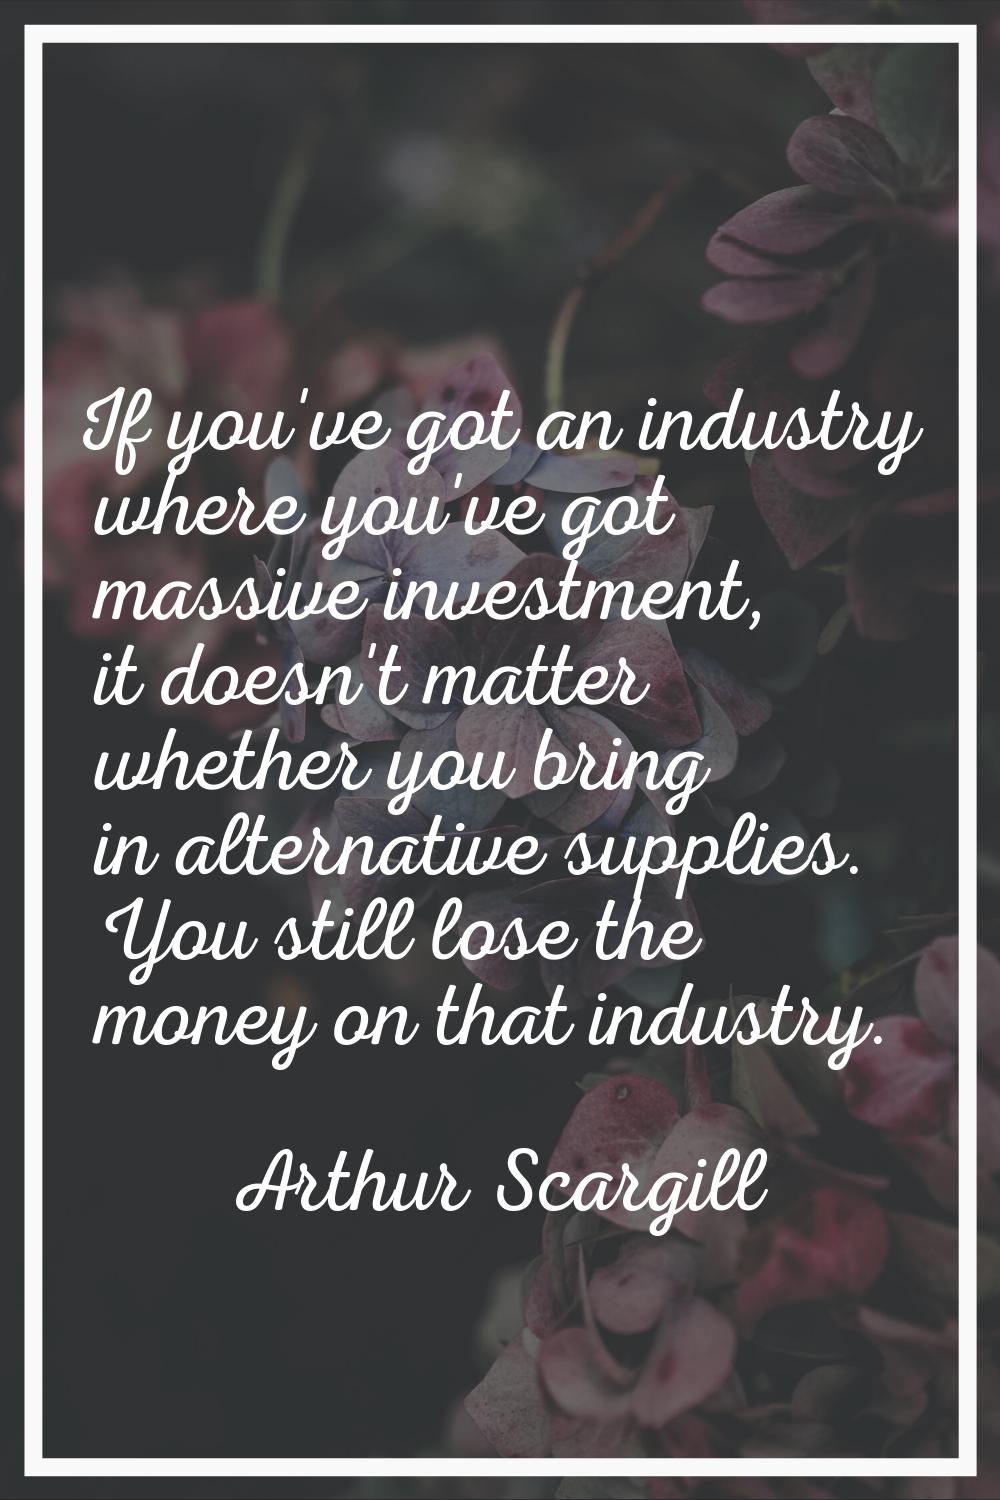 If you've got an industry where you've got massive investment, it doesn't matter whether you bring 